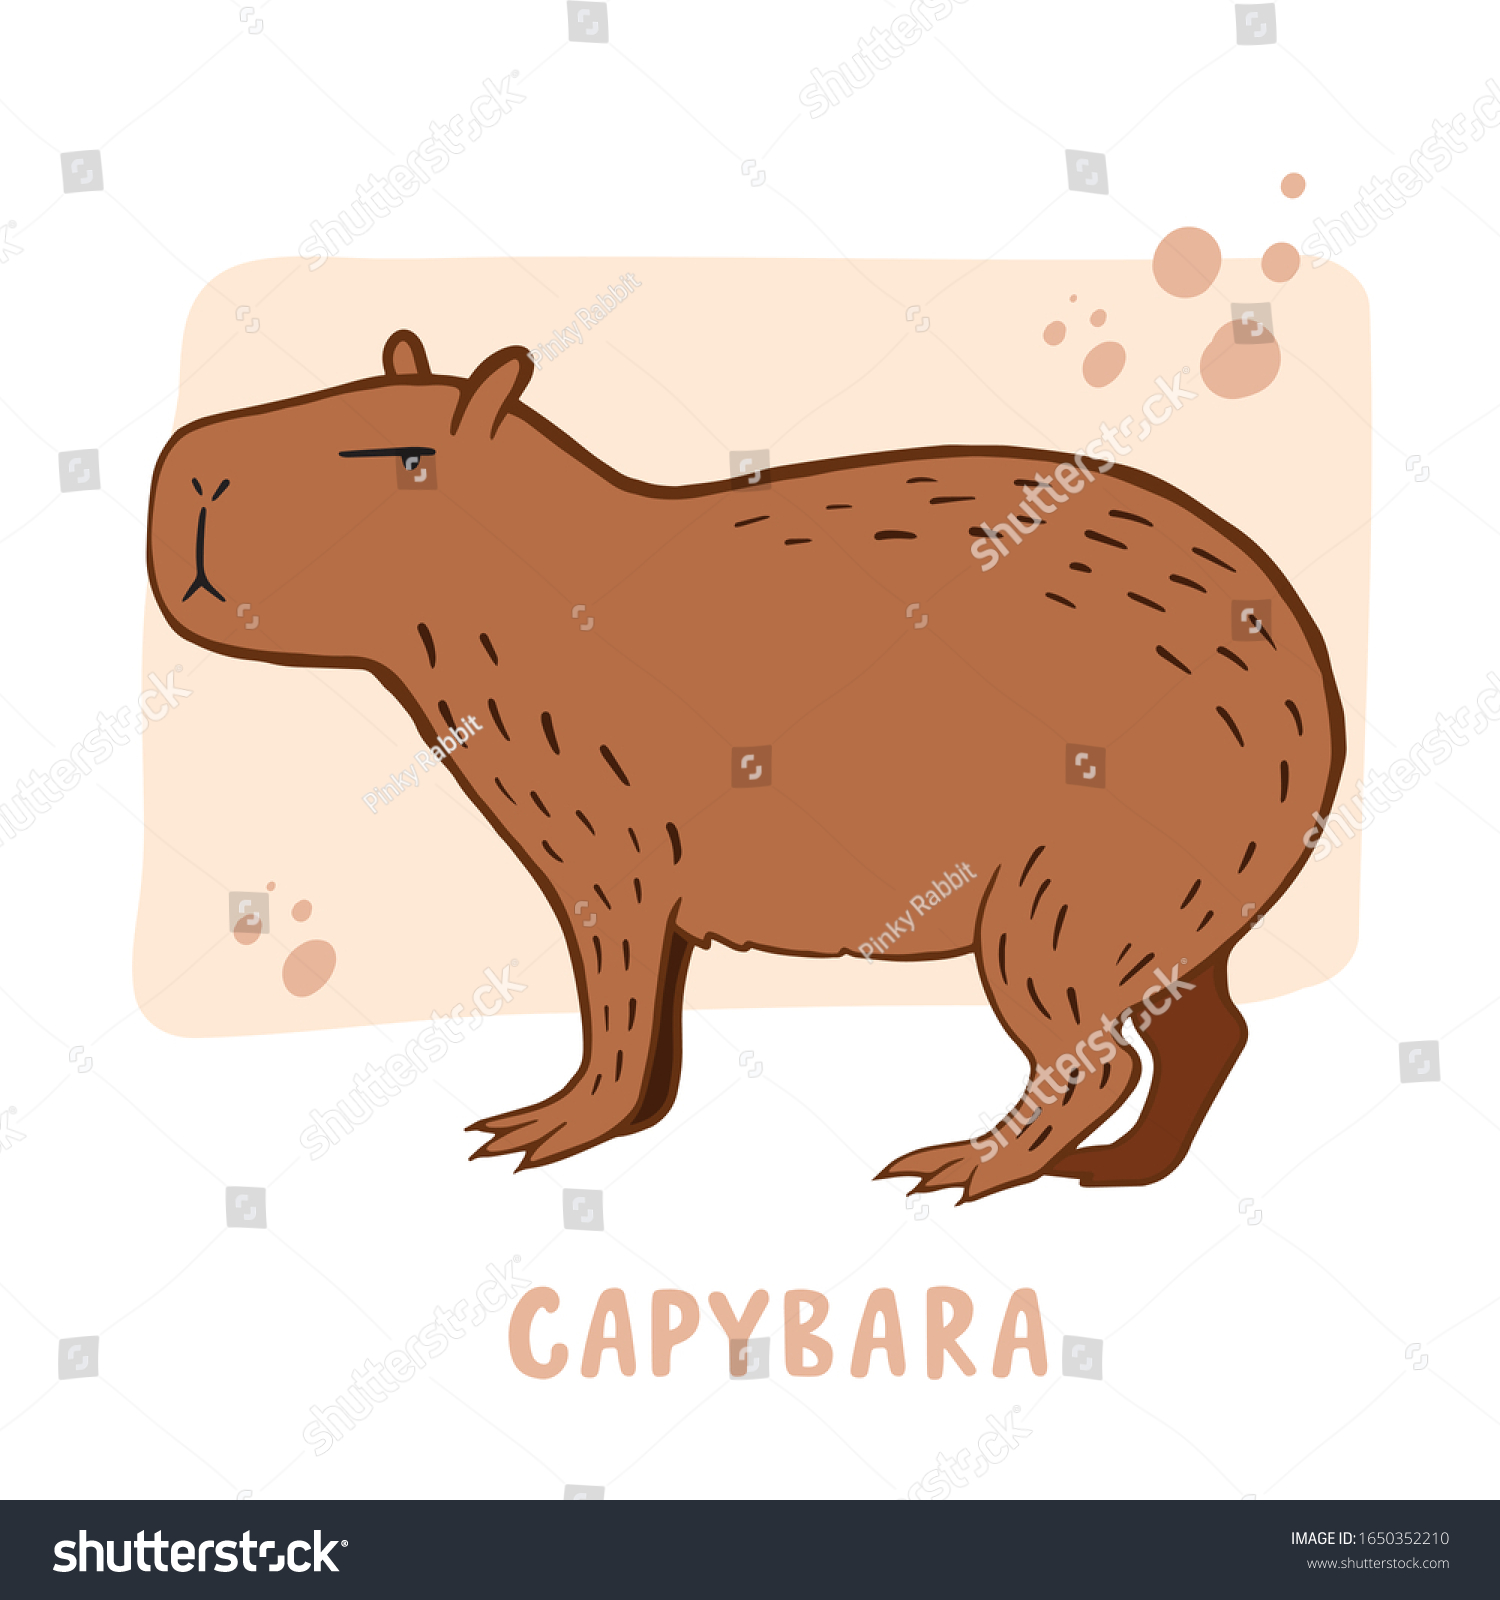 Capybara Vector Color Illustration Capybara Drawing Stock Vector Royalty Free 1650352210 I love when birthdays roll around because it gives me a chance to make a nonsensical card, usually involving an. https www shutterstock com image vector capybara vector color illustration drawing animal 1650352210